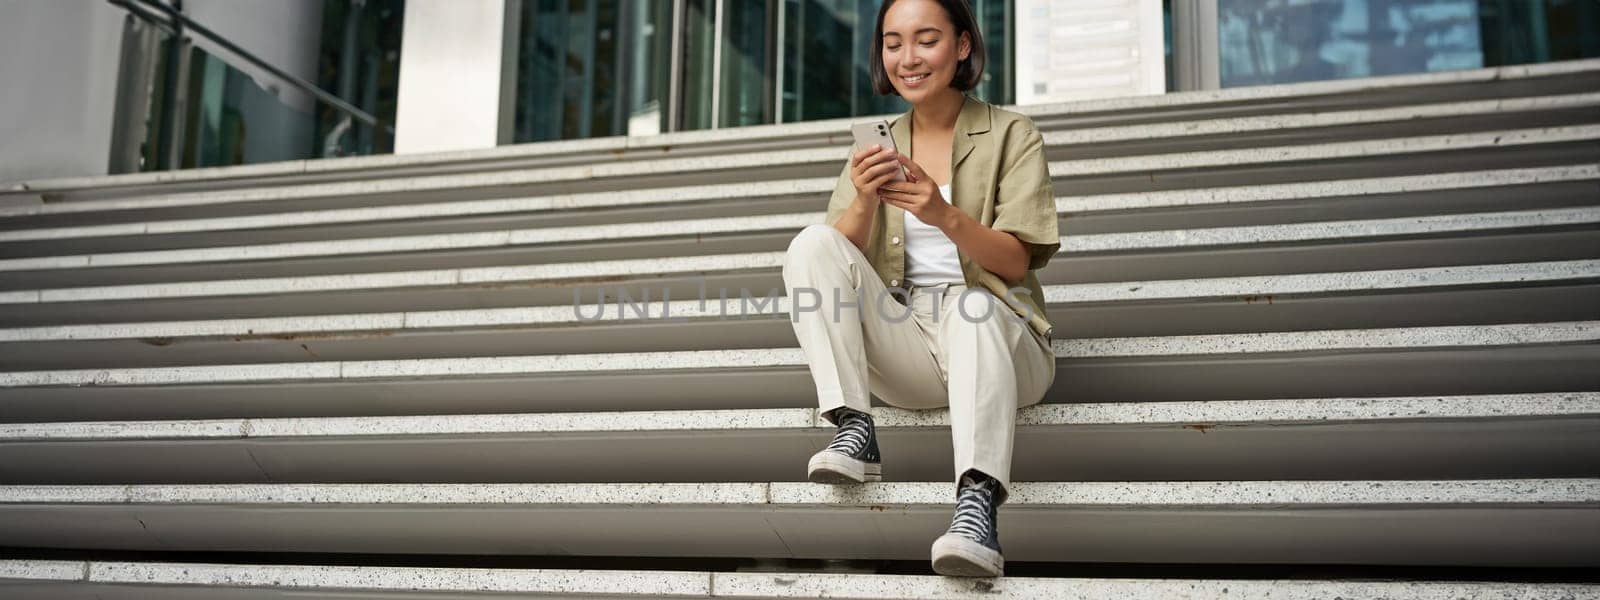 Cellular technology and people. Young happy asian girl sits with smartphone in front of building. Woman using mobile phone, smiling while looking at screen.